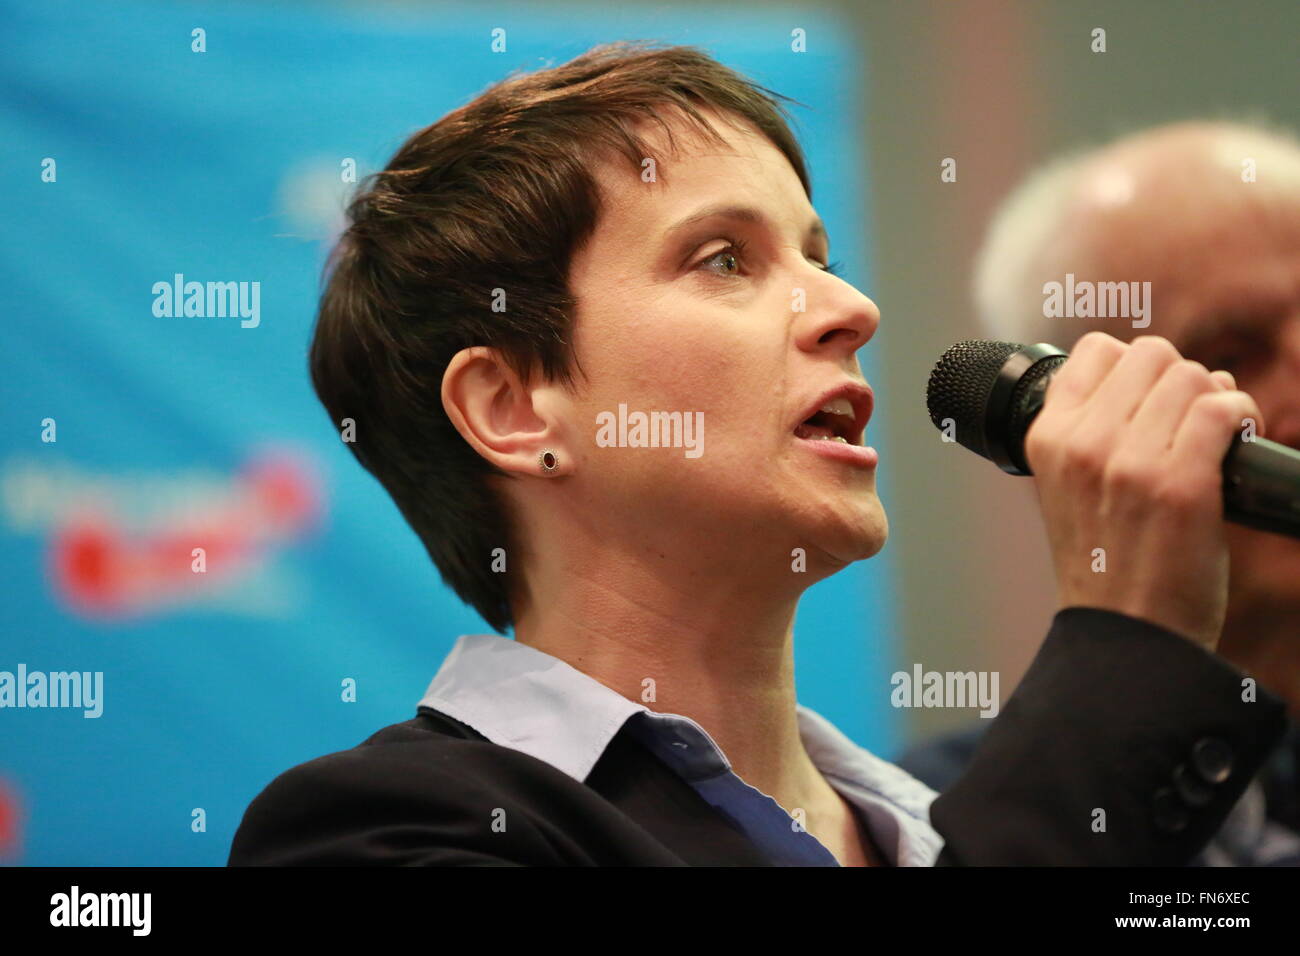 Berlin, Germany. 13th Mar, 2016. Frauke Petry during the election night of Alternative for Germany (AfD) in AO hostel in Berlin's Lichtenberg district to the state elections in Baden-Württemberg, Rheinland-Pfalz and Sachsen-Anhalt. © Simone Kuhlmey/Pacific Press/Alamy Live News Stock Photo